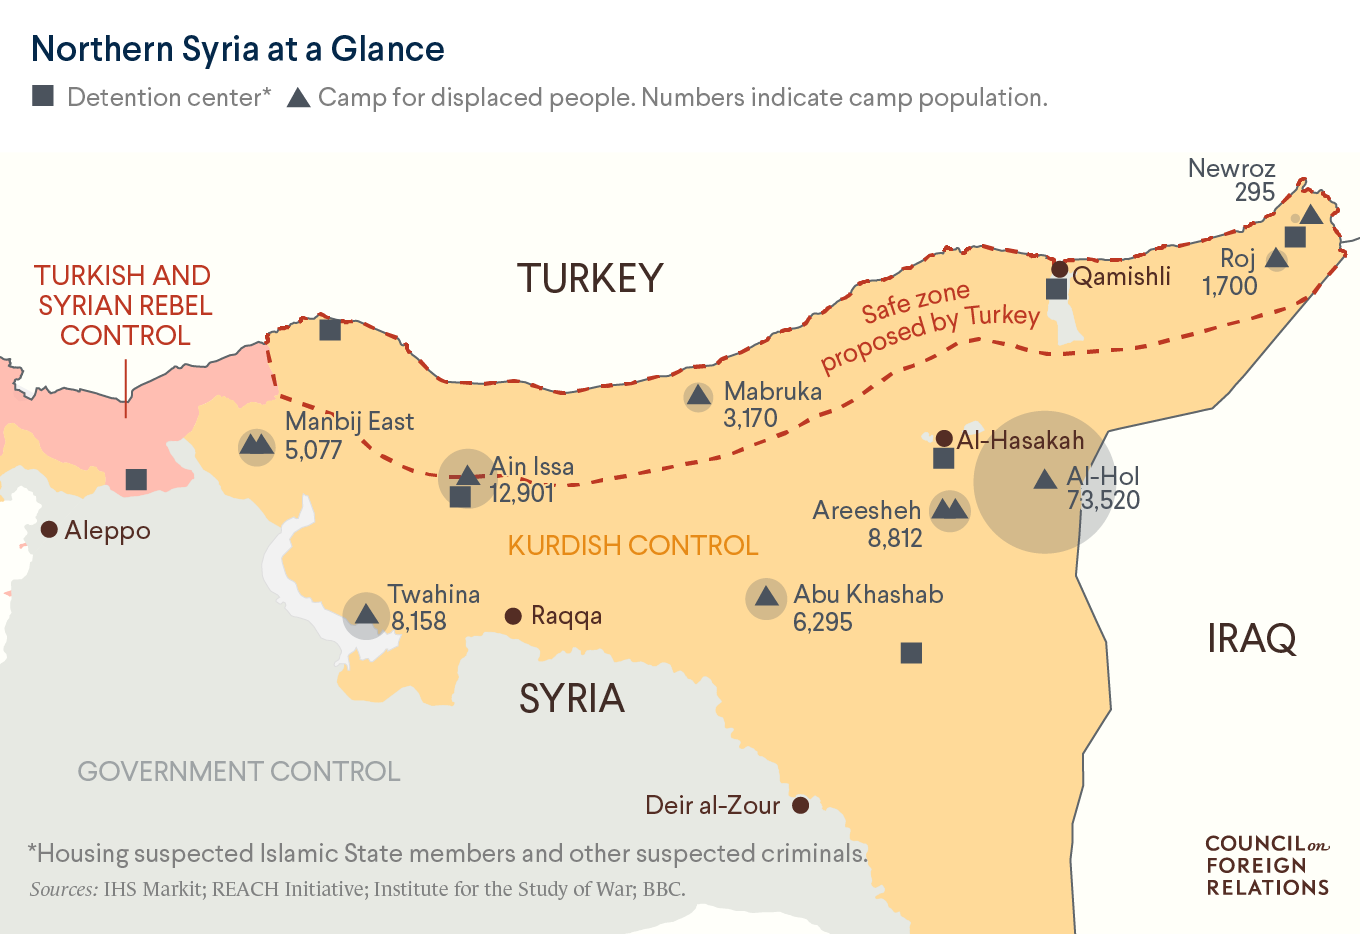 Who's Who in Northern Syria? | Council on Foreign Relations